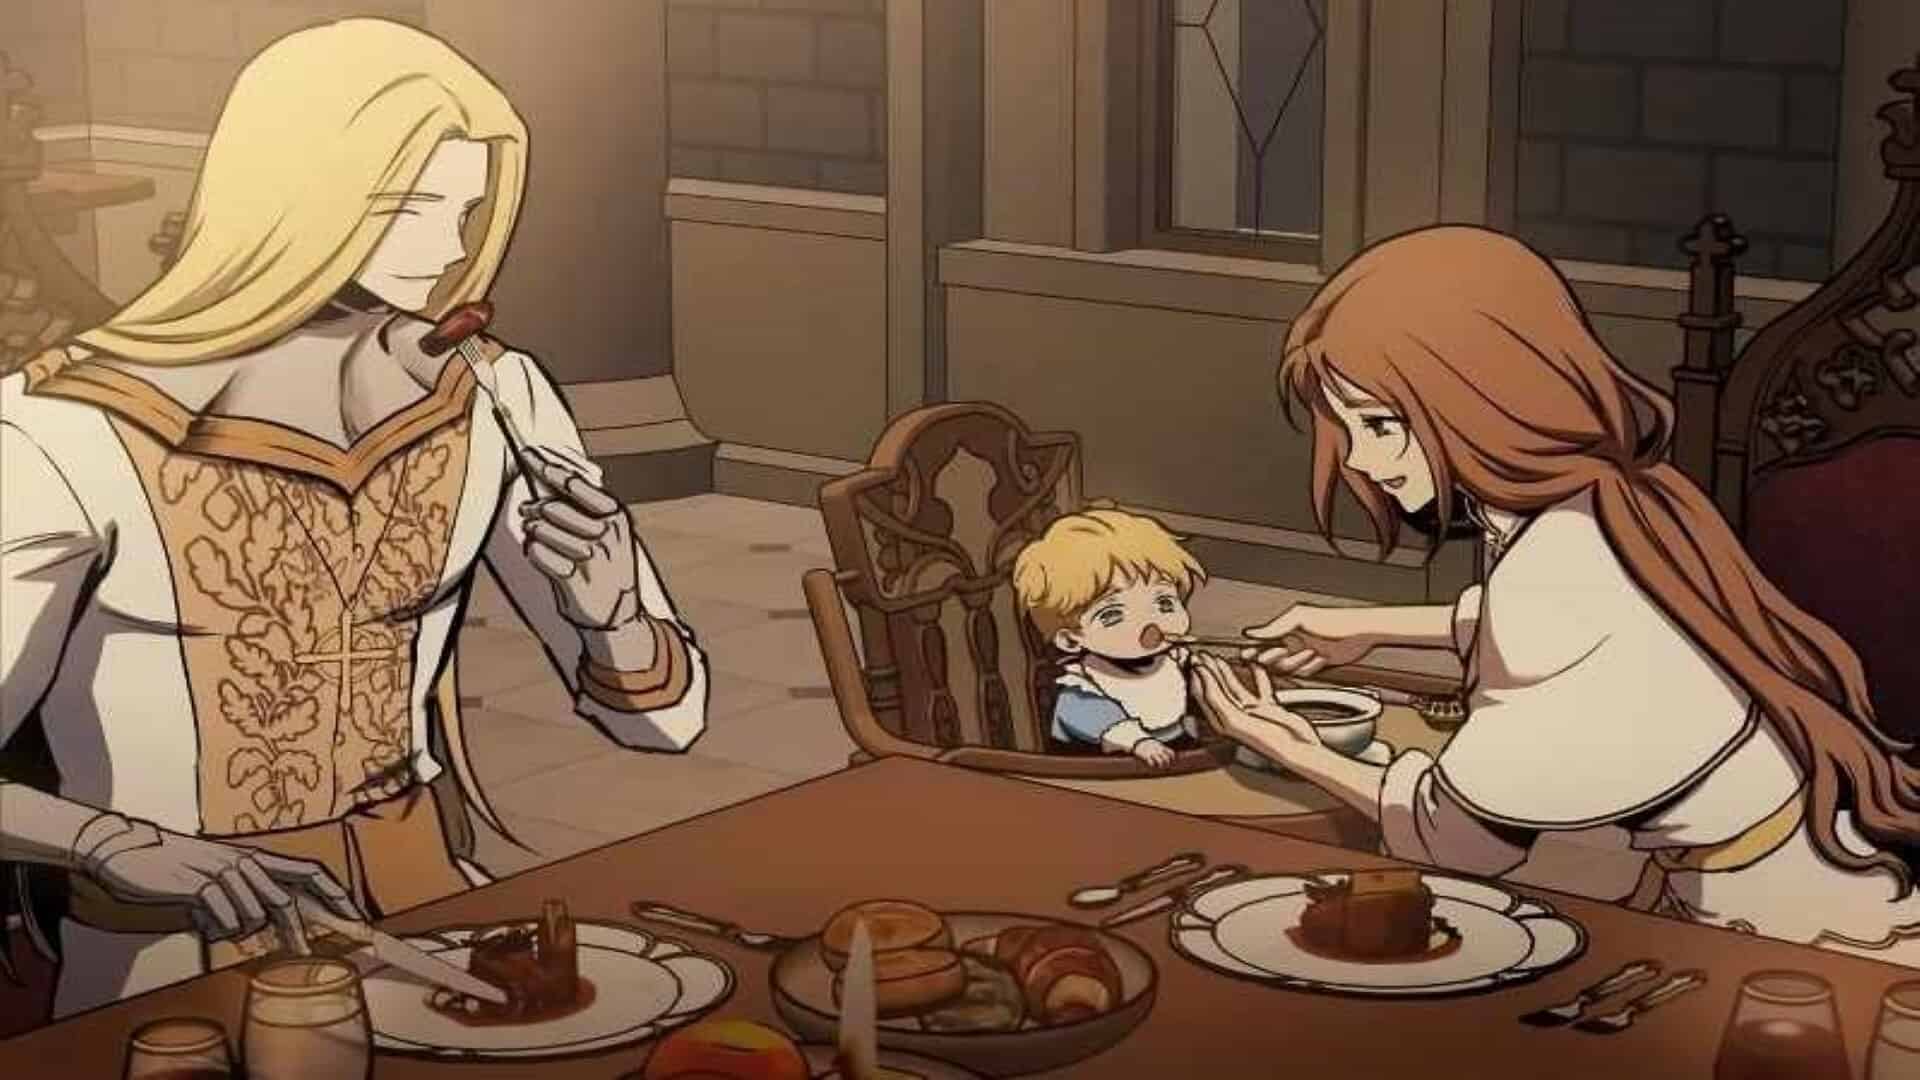 Lucius Enjoying Dinner With His Wife Cludia And Child Since The 3rd Chaptel Is Closed Off Now - Reincarnation Of the Suicidal Battle God Chapter 81